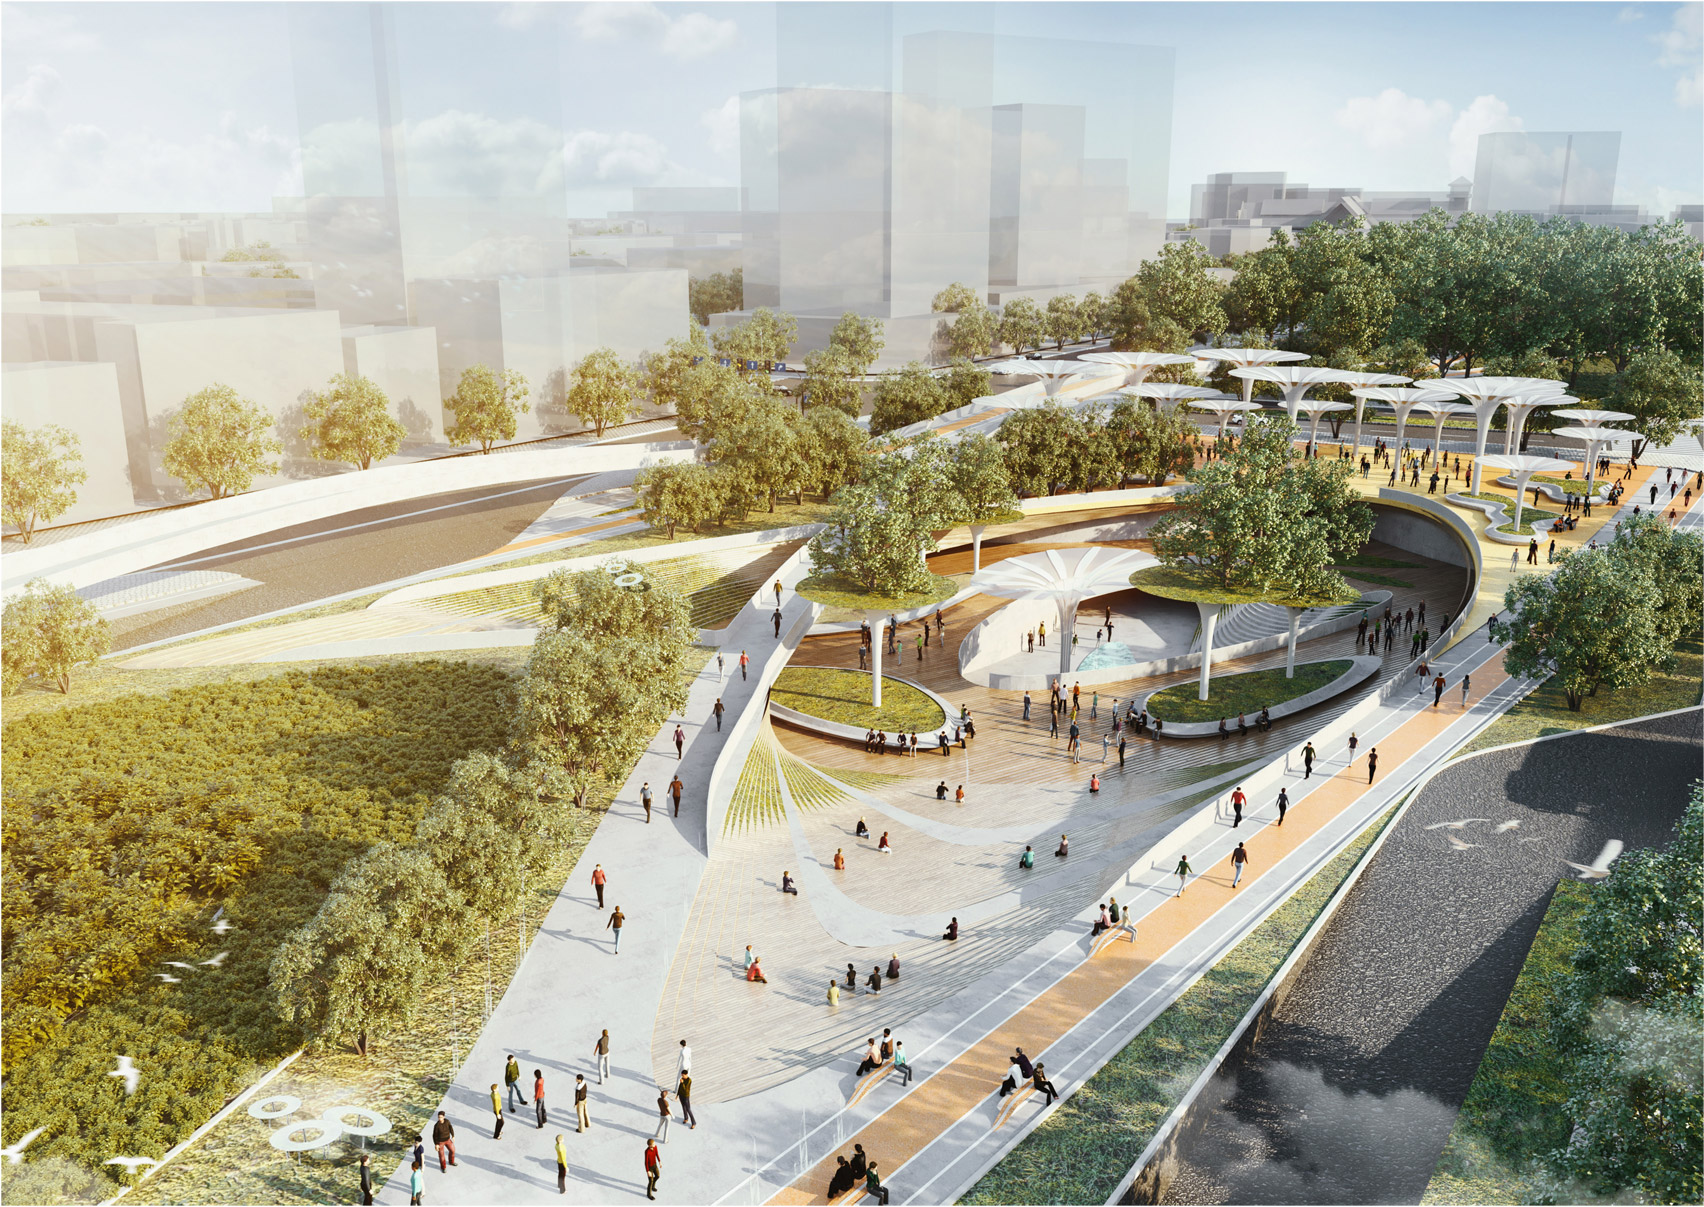 Photograph of Central Park masterplan for Ho Chi Minch City in Vietnam by LAVA and Aspect Studio